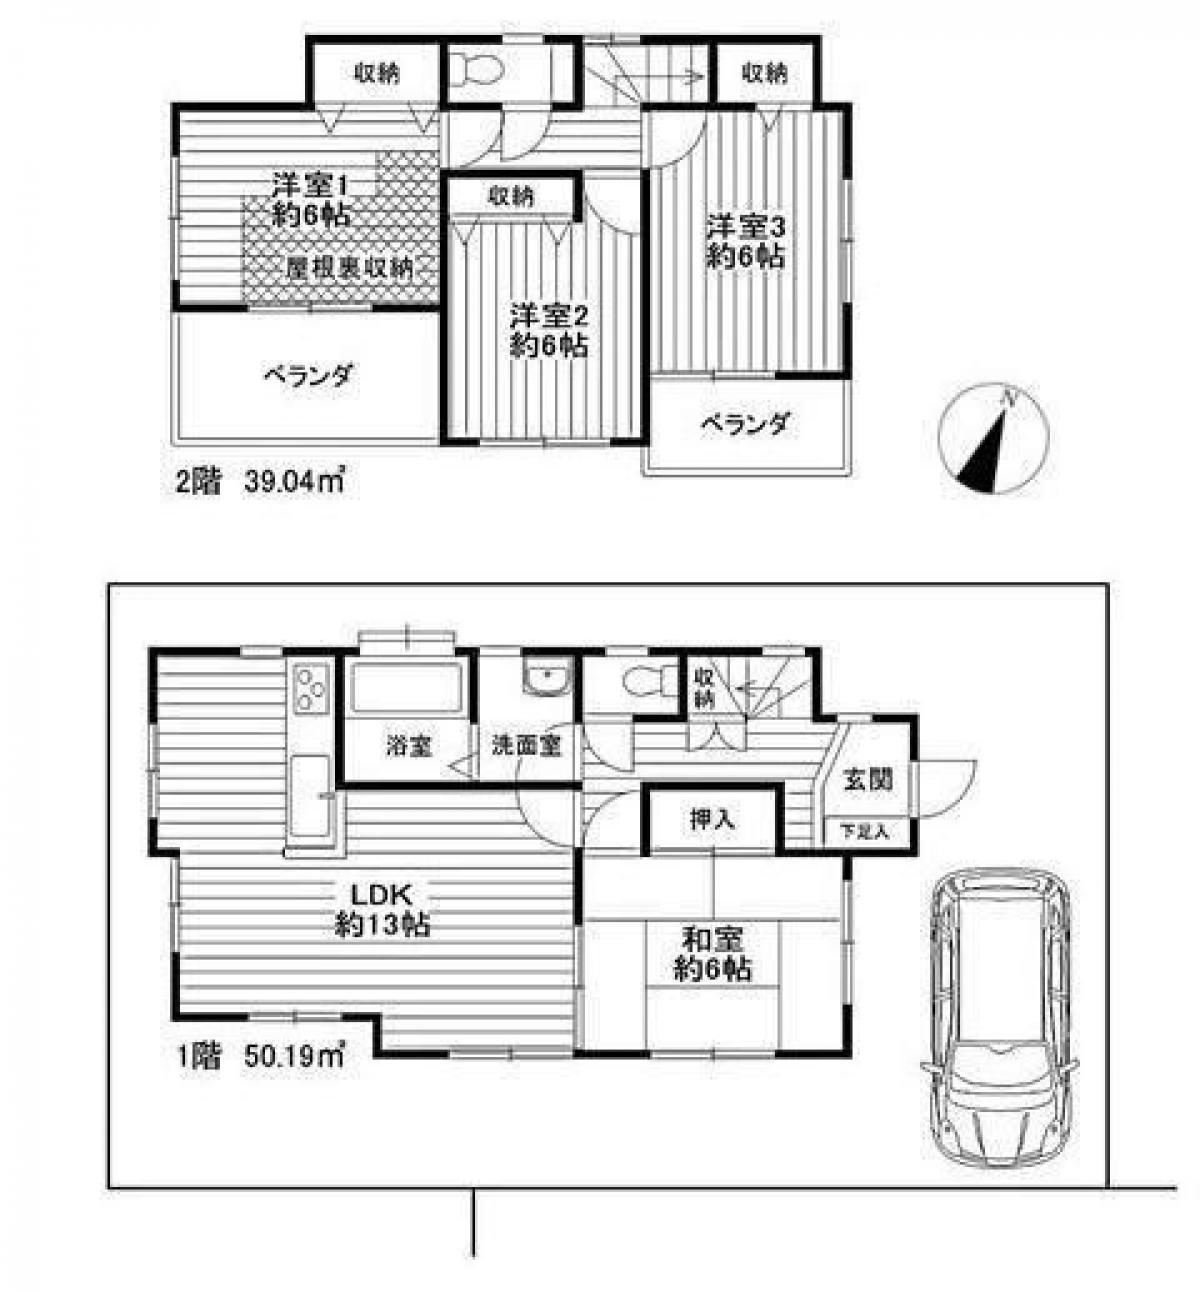 Picture of Home For Sale in Akishima Shi, Tokyo, Japan